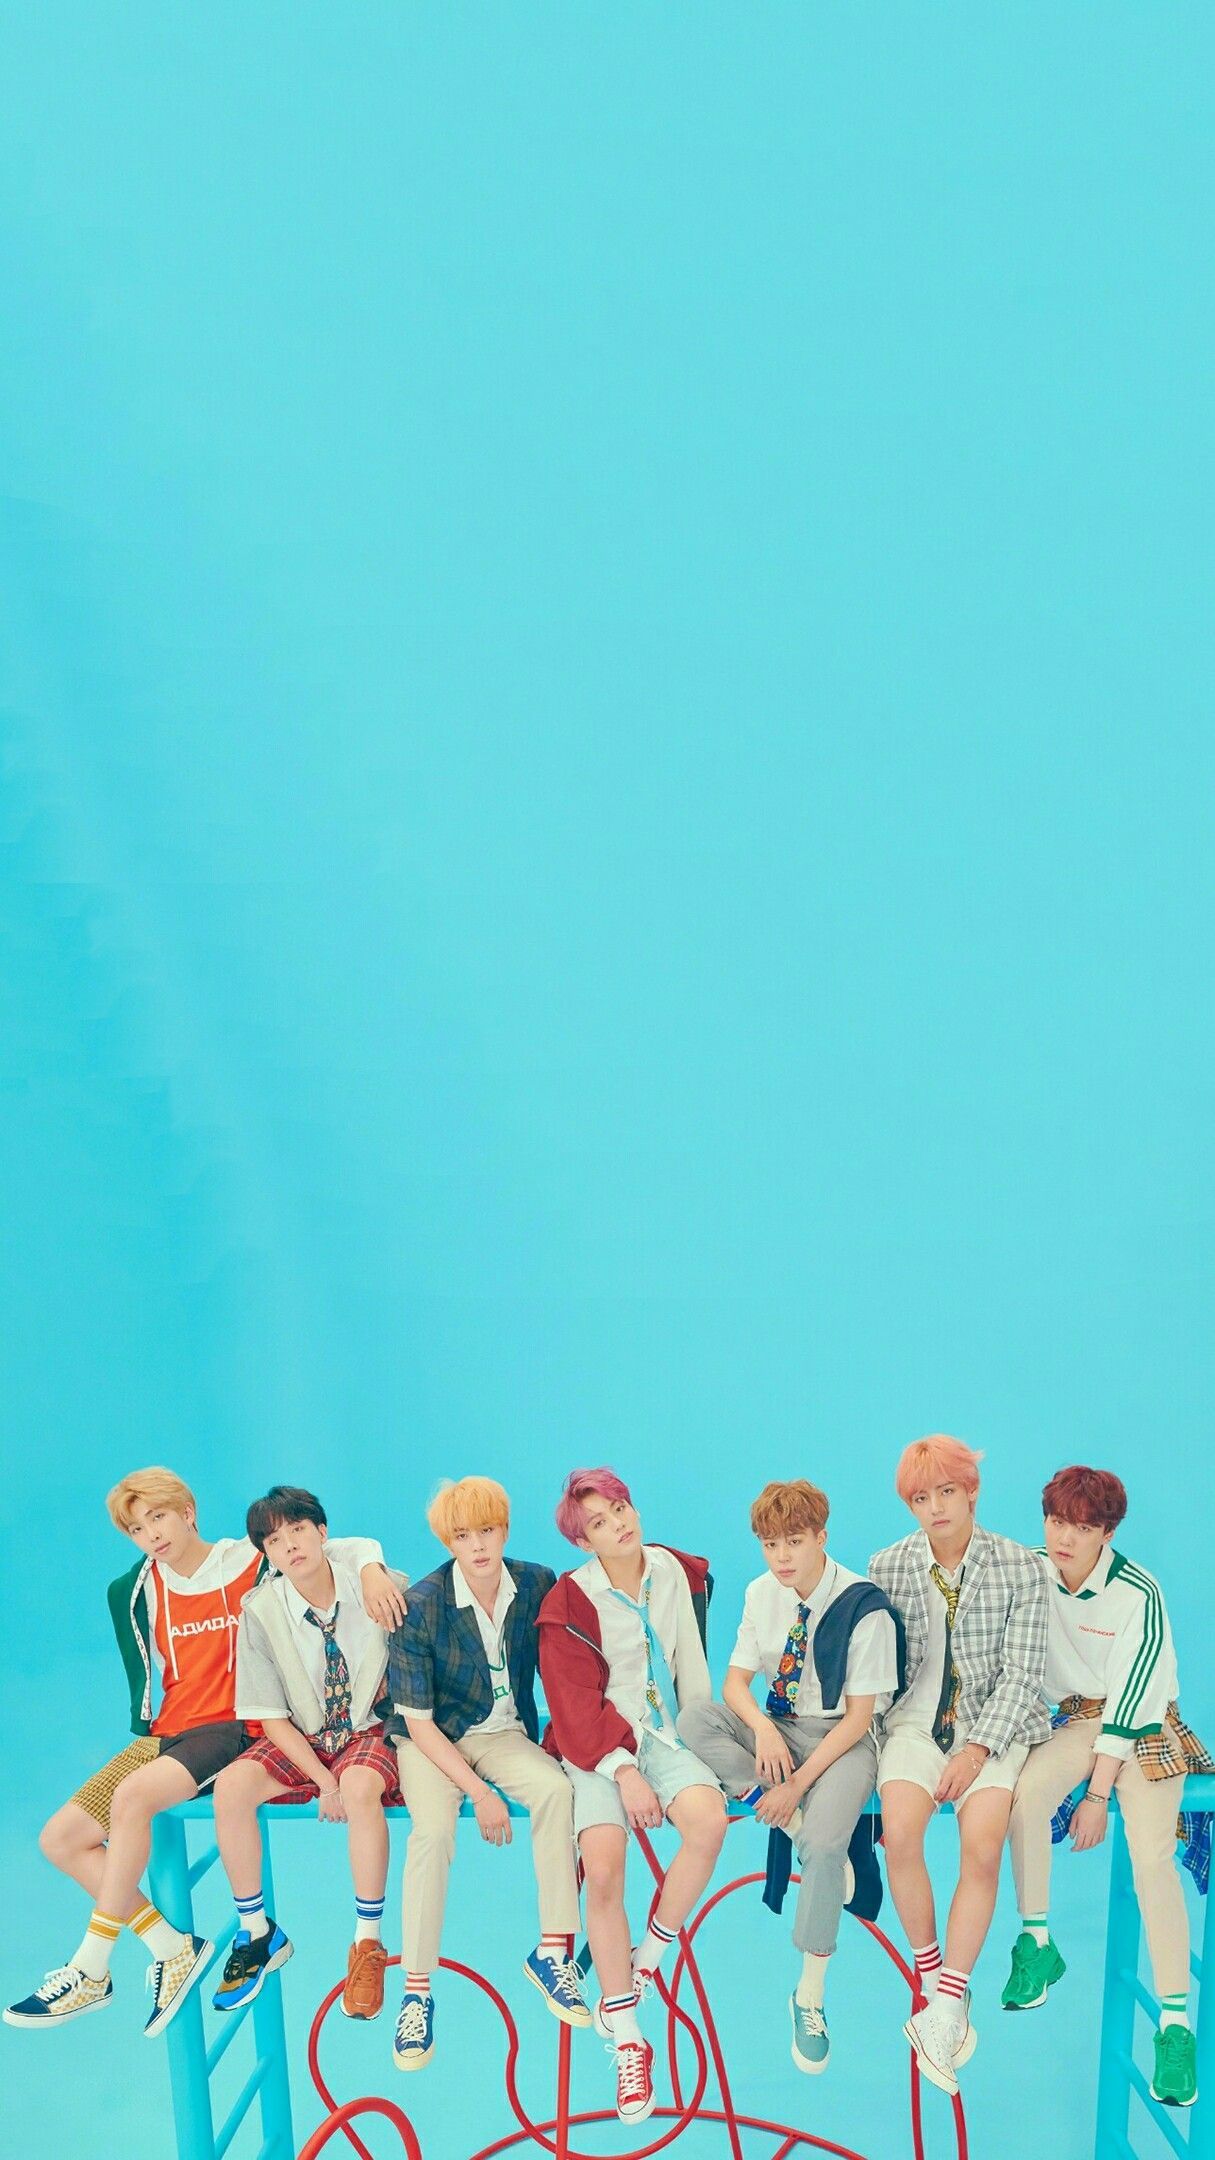 Love Yourself Answer Wallpapers